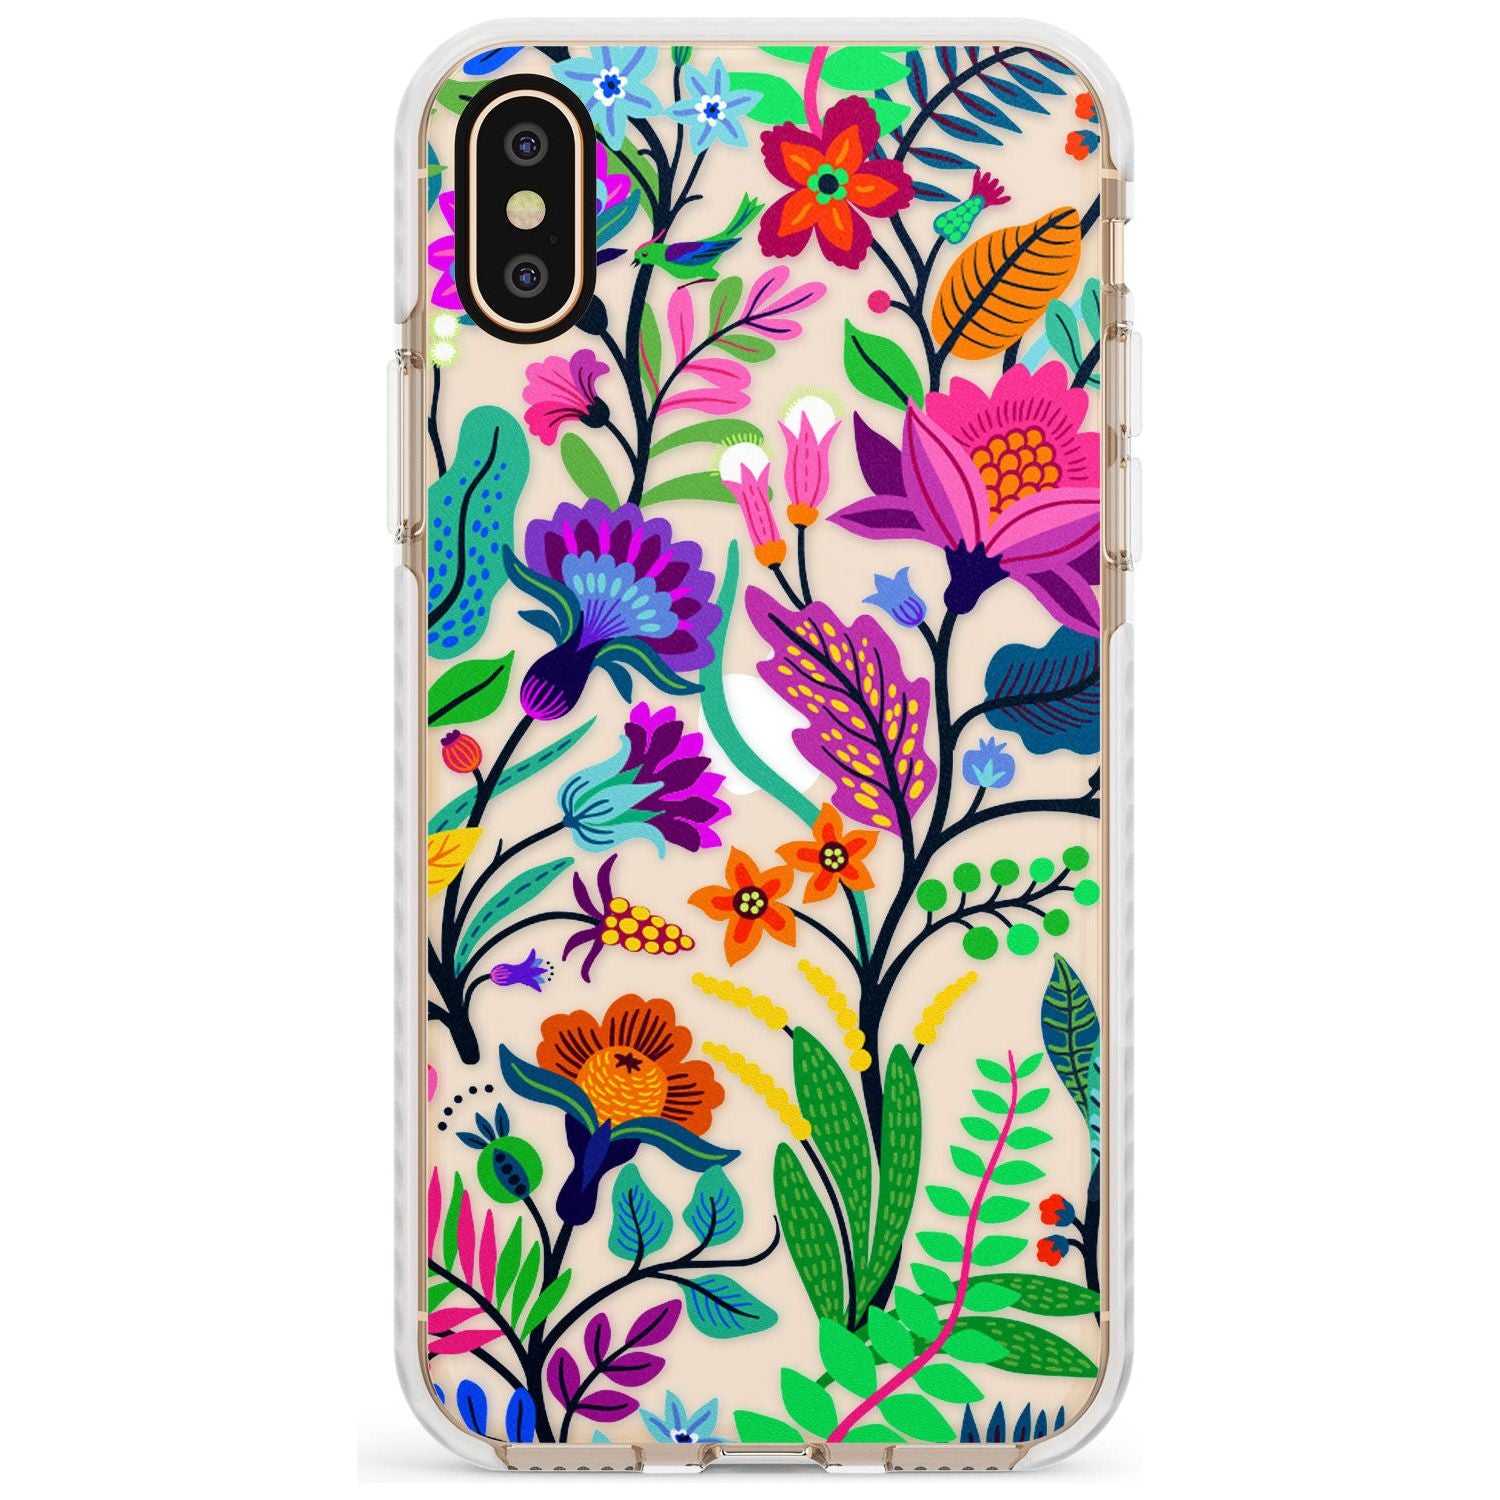 Floral Vibe Impact Phone Case for iPhone X XS Max XR